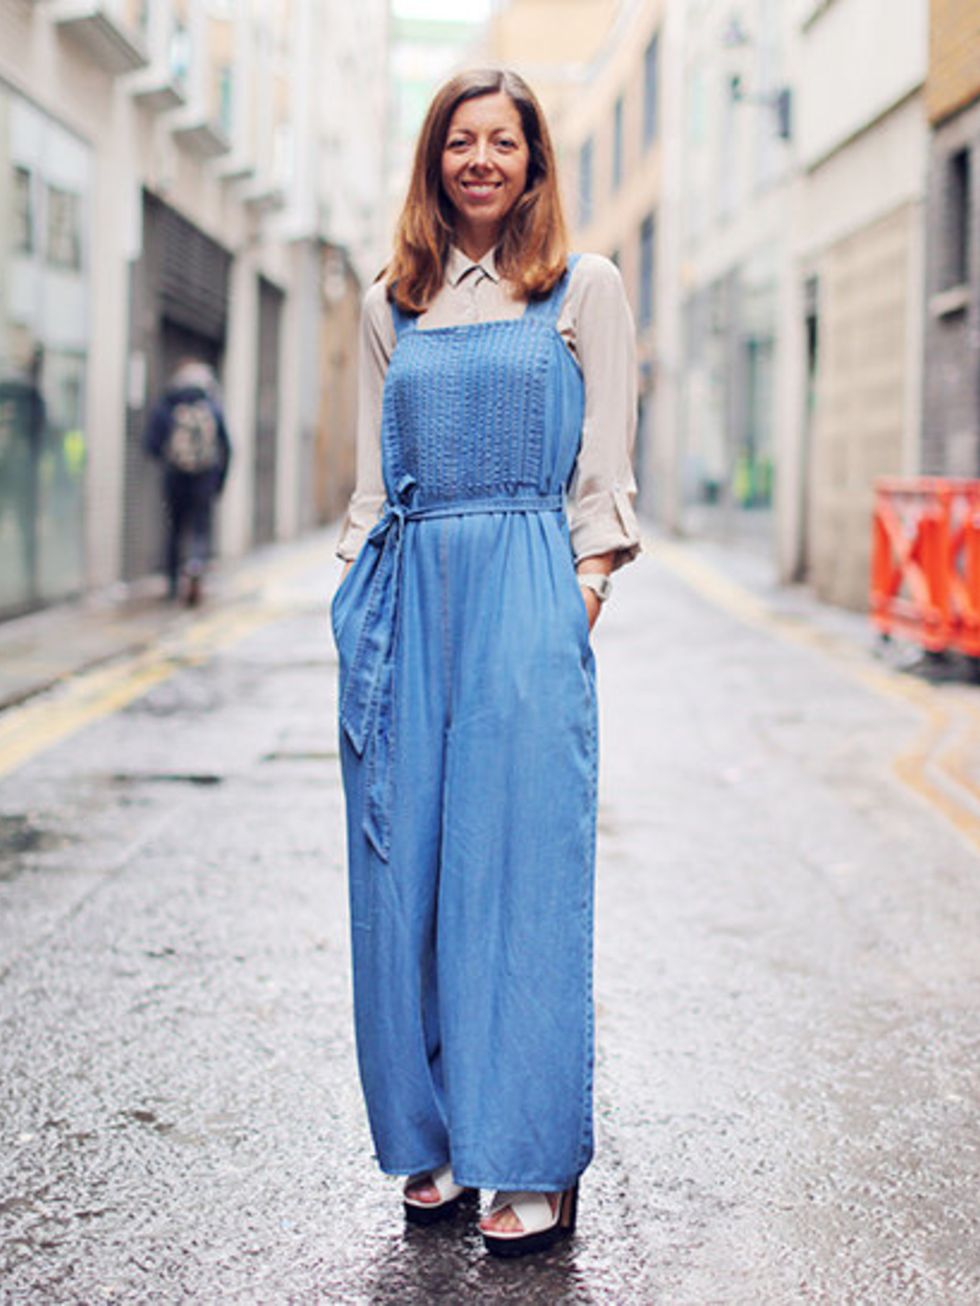 <p>Kirsty Dale - Executive Fashion Director</p><p>Marc by Marc dungarees, Whistles shirt, New Look block wedges.</p>